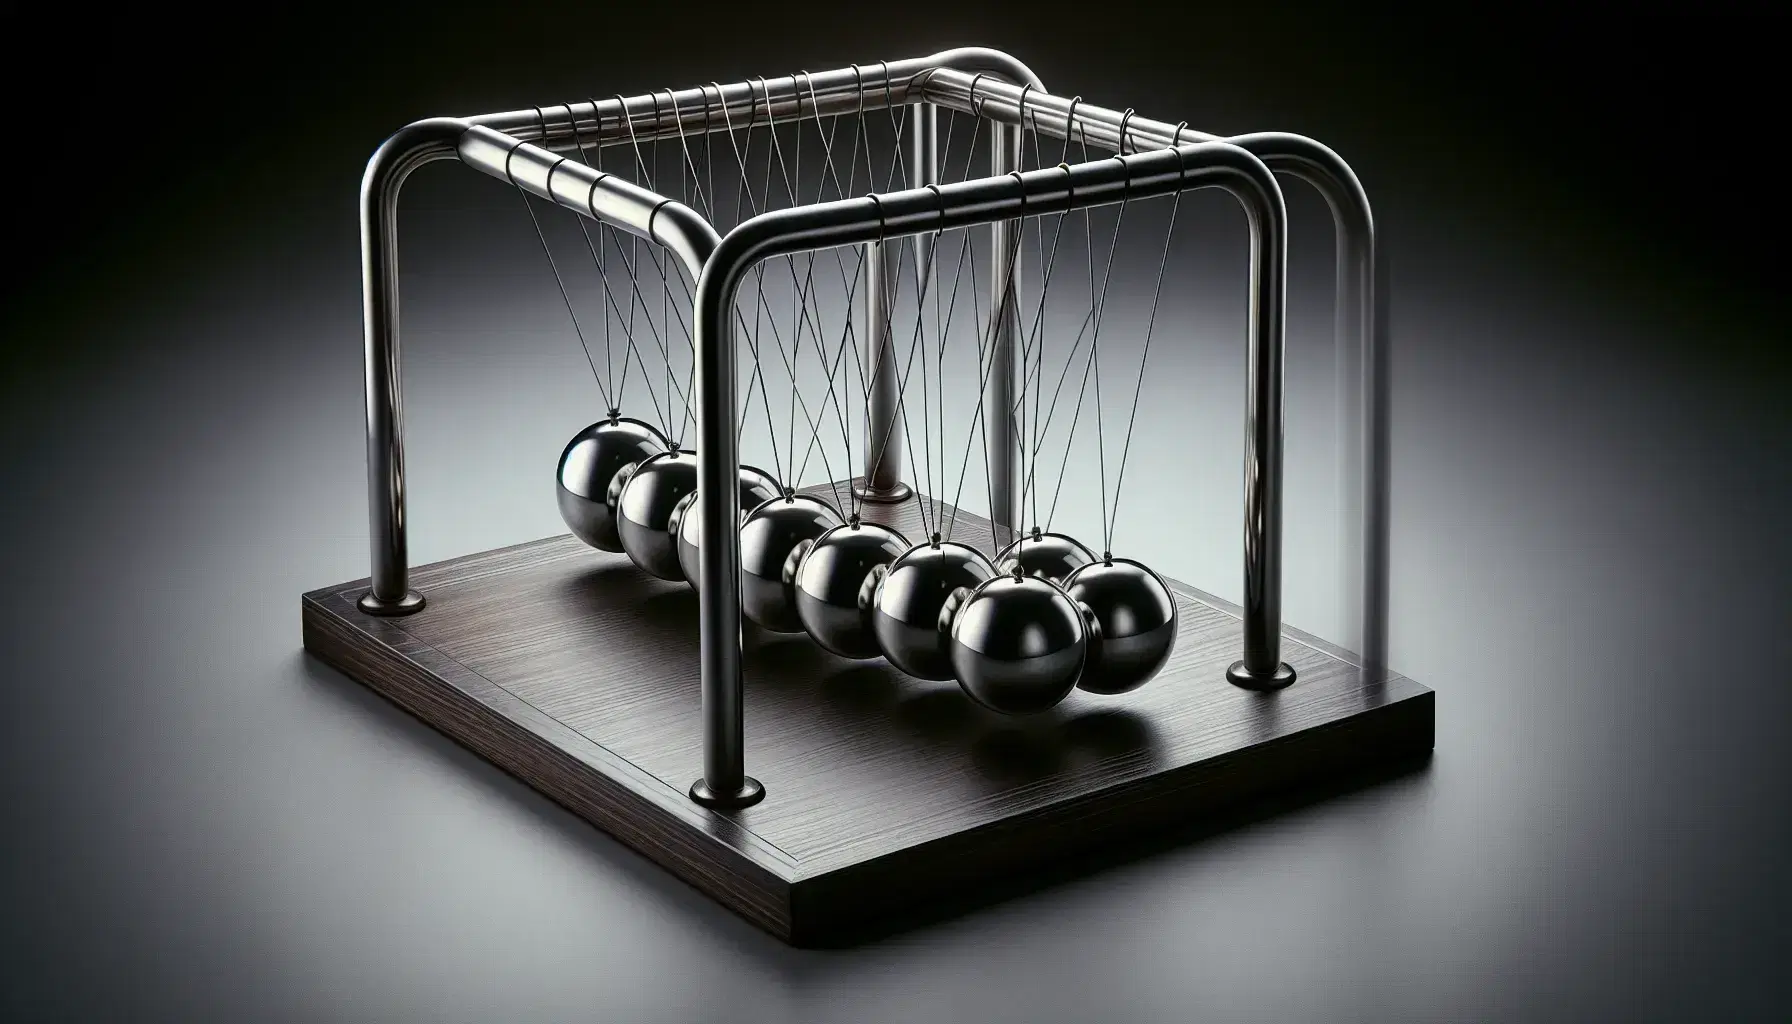 Classic Newton's cradle with shiny metallic spheres suspended by strings, two moving and three stationary, on blurred background.